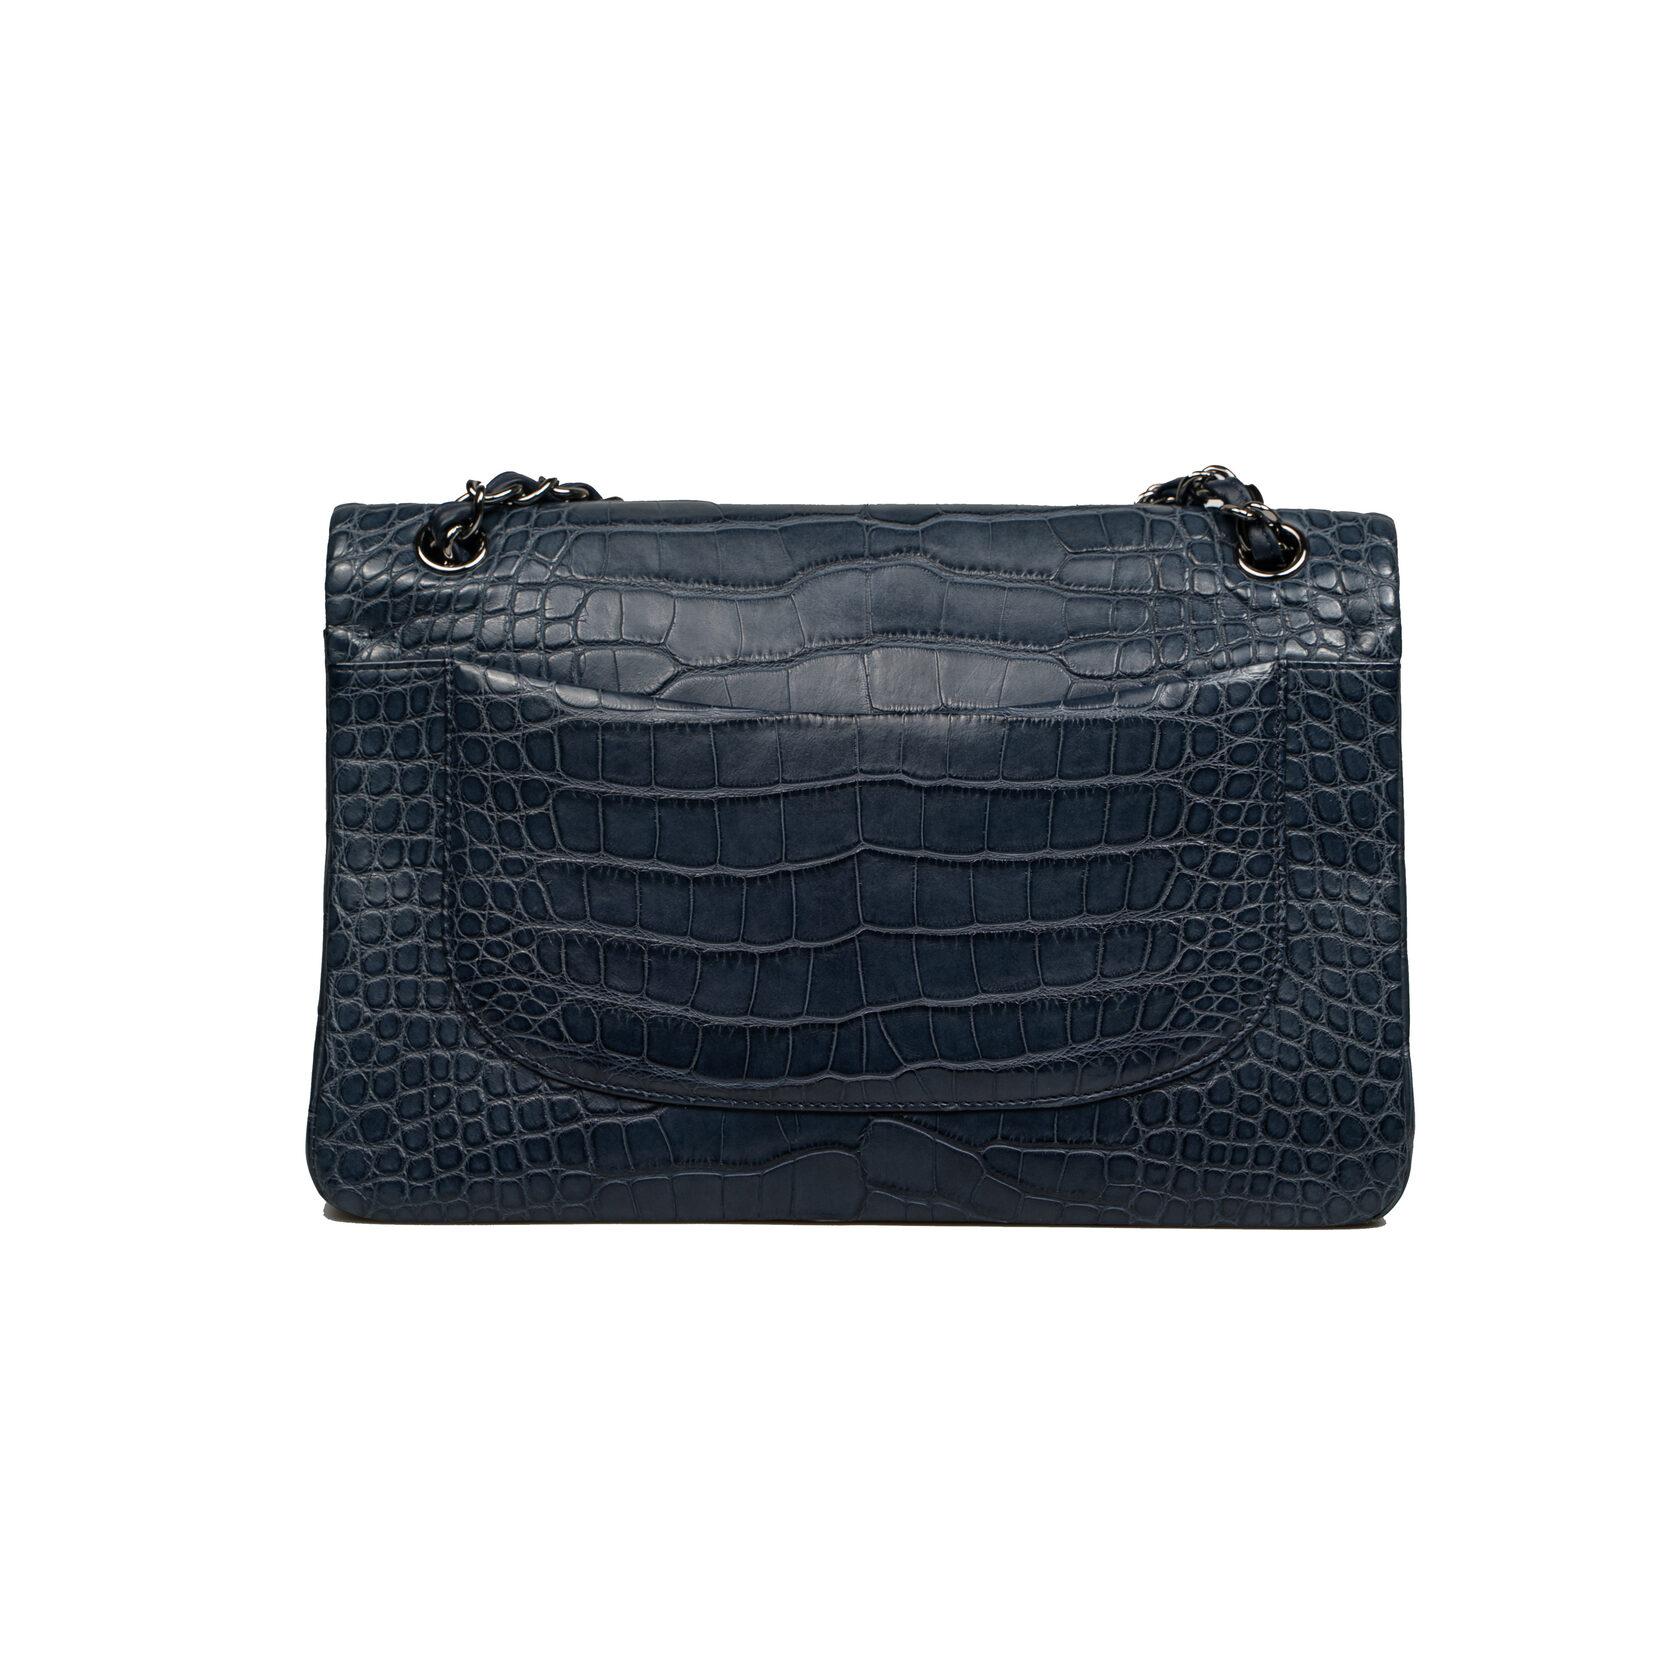 Chanel 11.12 Classic / Timeless Jumbo Double Flap Alligator For Sale 9